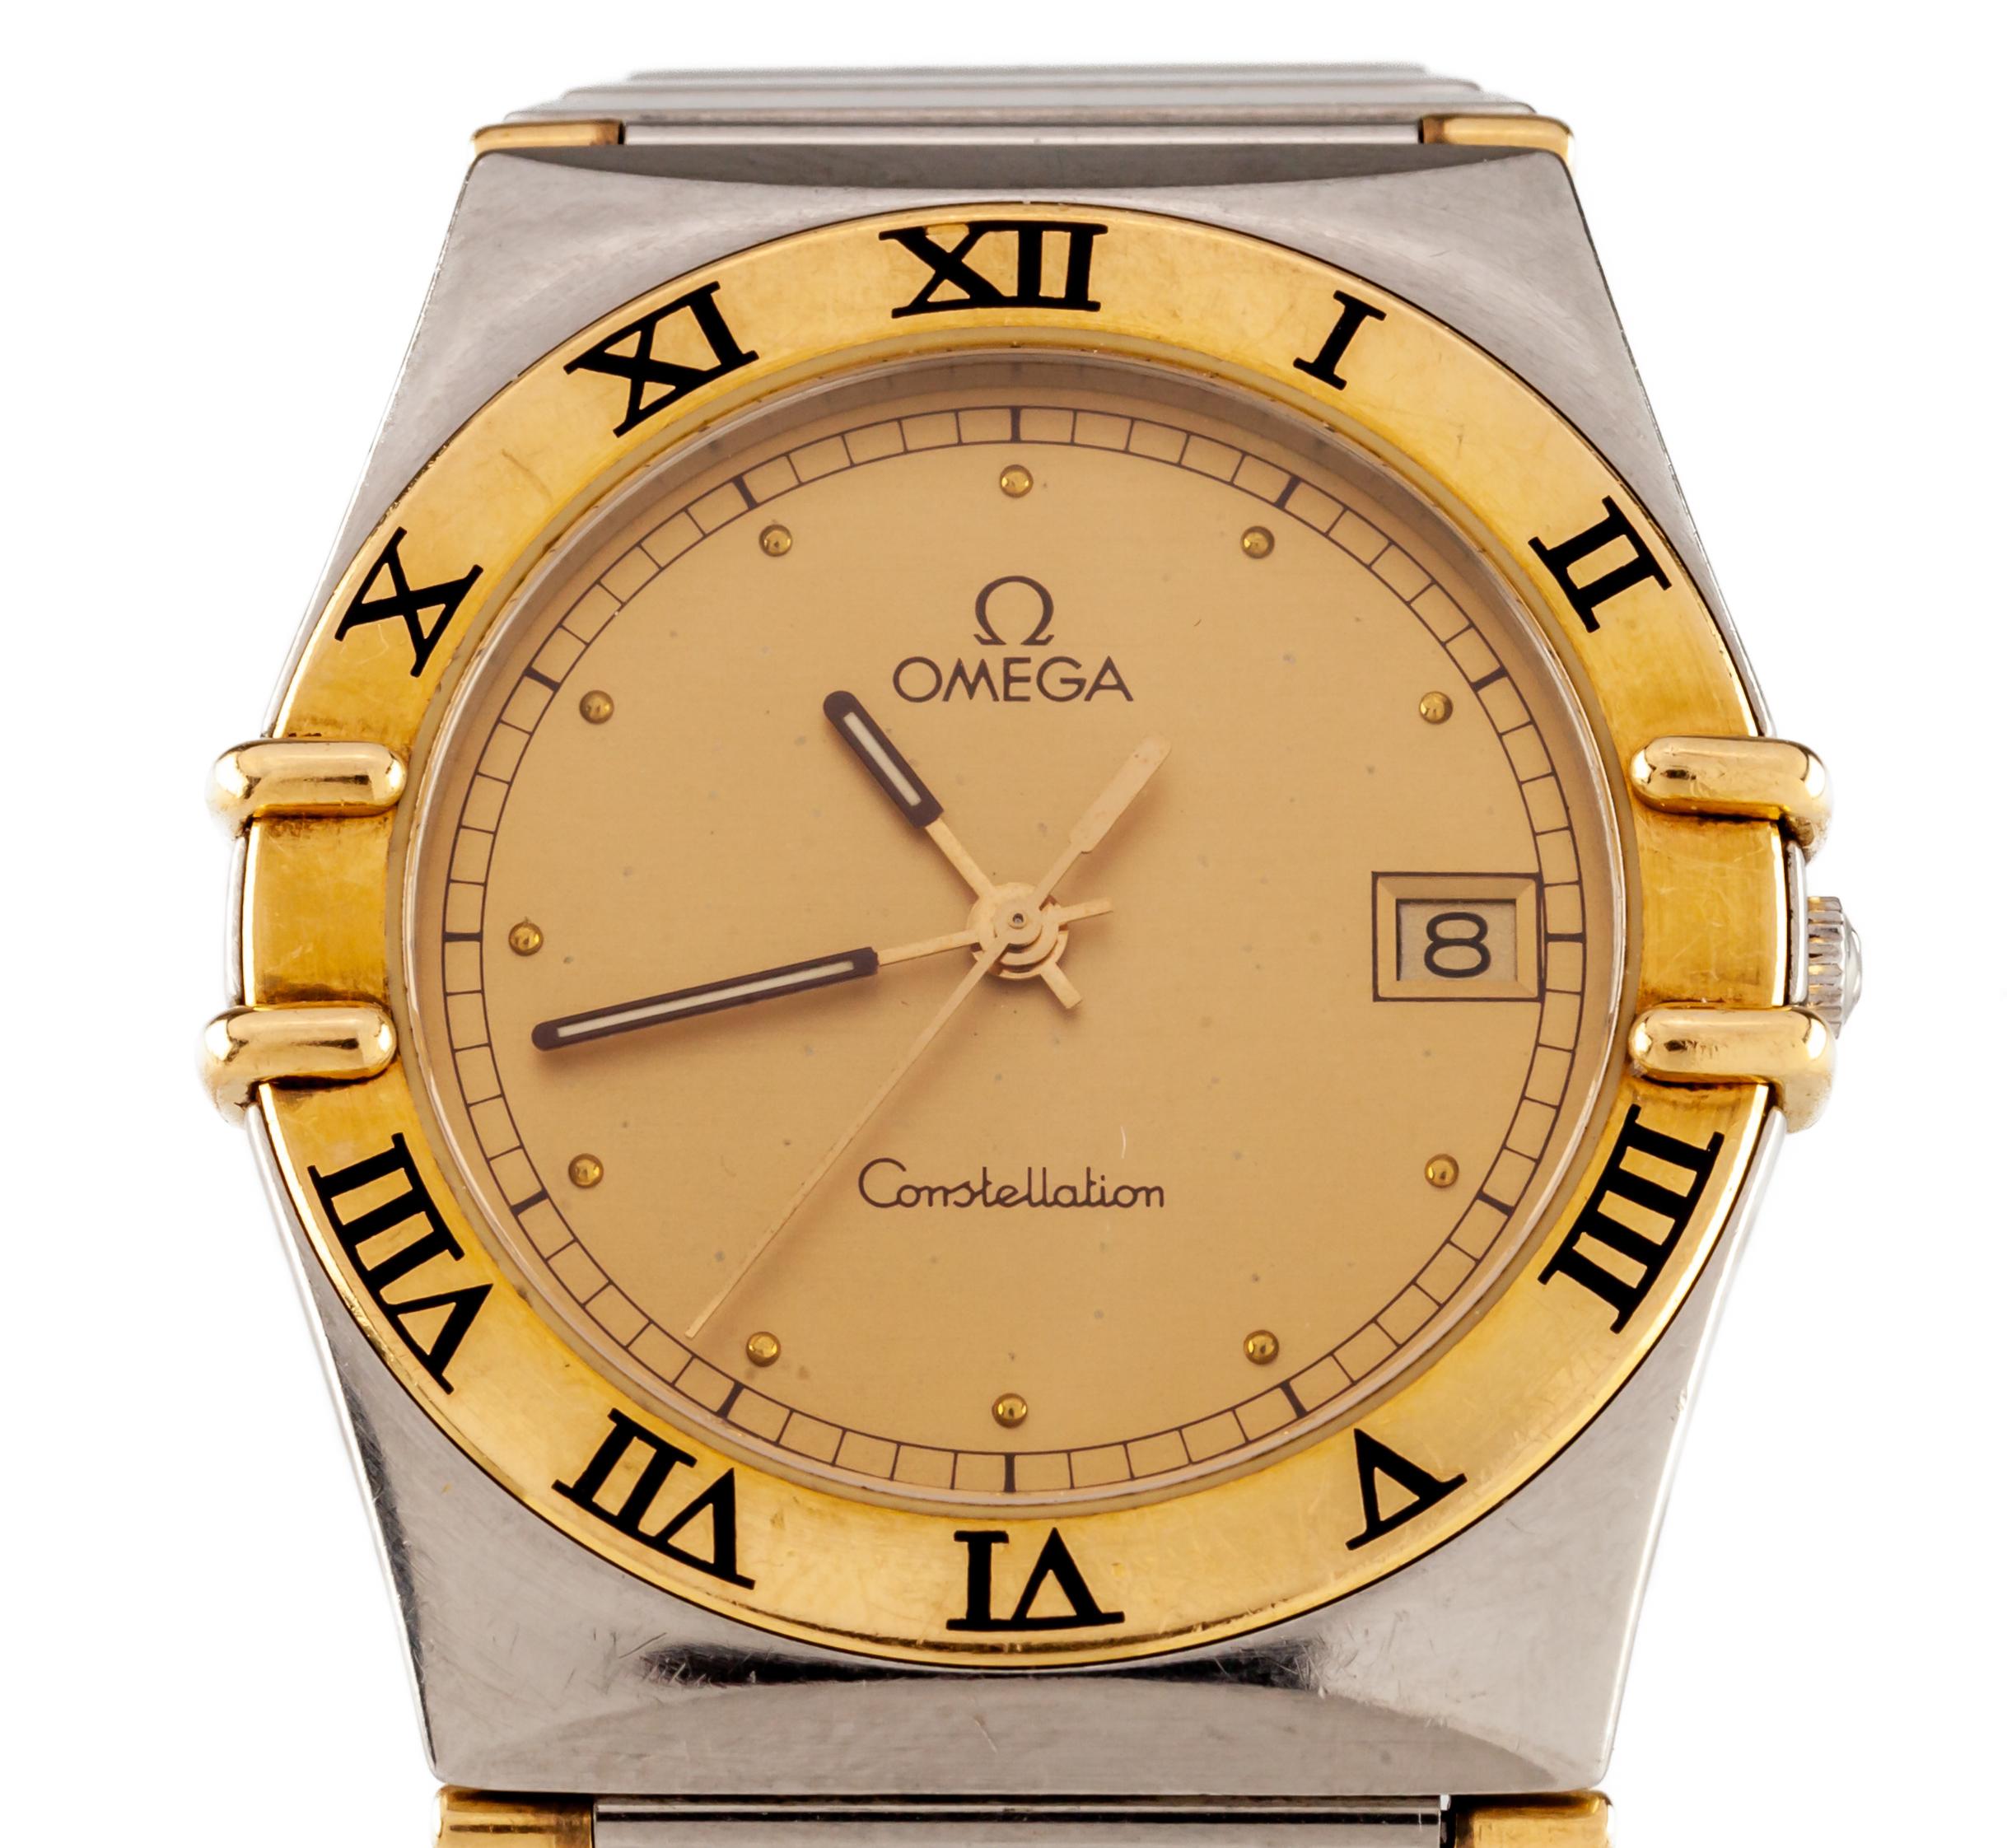 
Omega Men's Quartz Two-Tone Constellation Watch w/ Date
Movement #255461
Case #53169630
Stainless Steel Case w/ 18k Gold Roman Numeral Bezel
33 mm in Diameter (34 mm w/ Crown)
Lug-to-Lug Distance = 37 mm
Lug-to-Lug Width = 23 mm
Thickness = 6